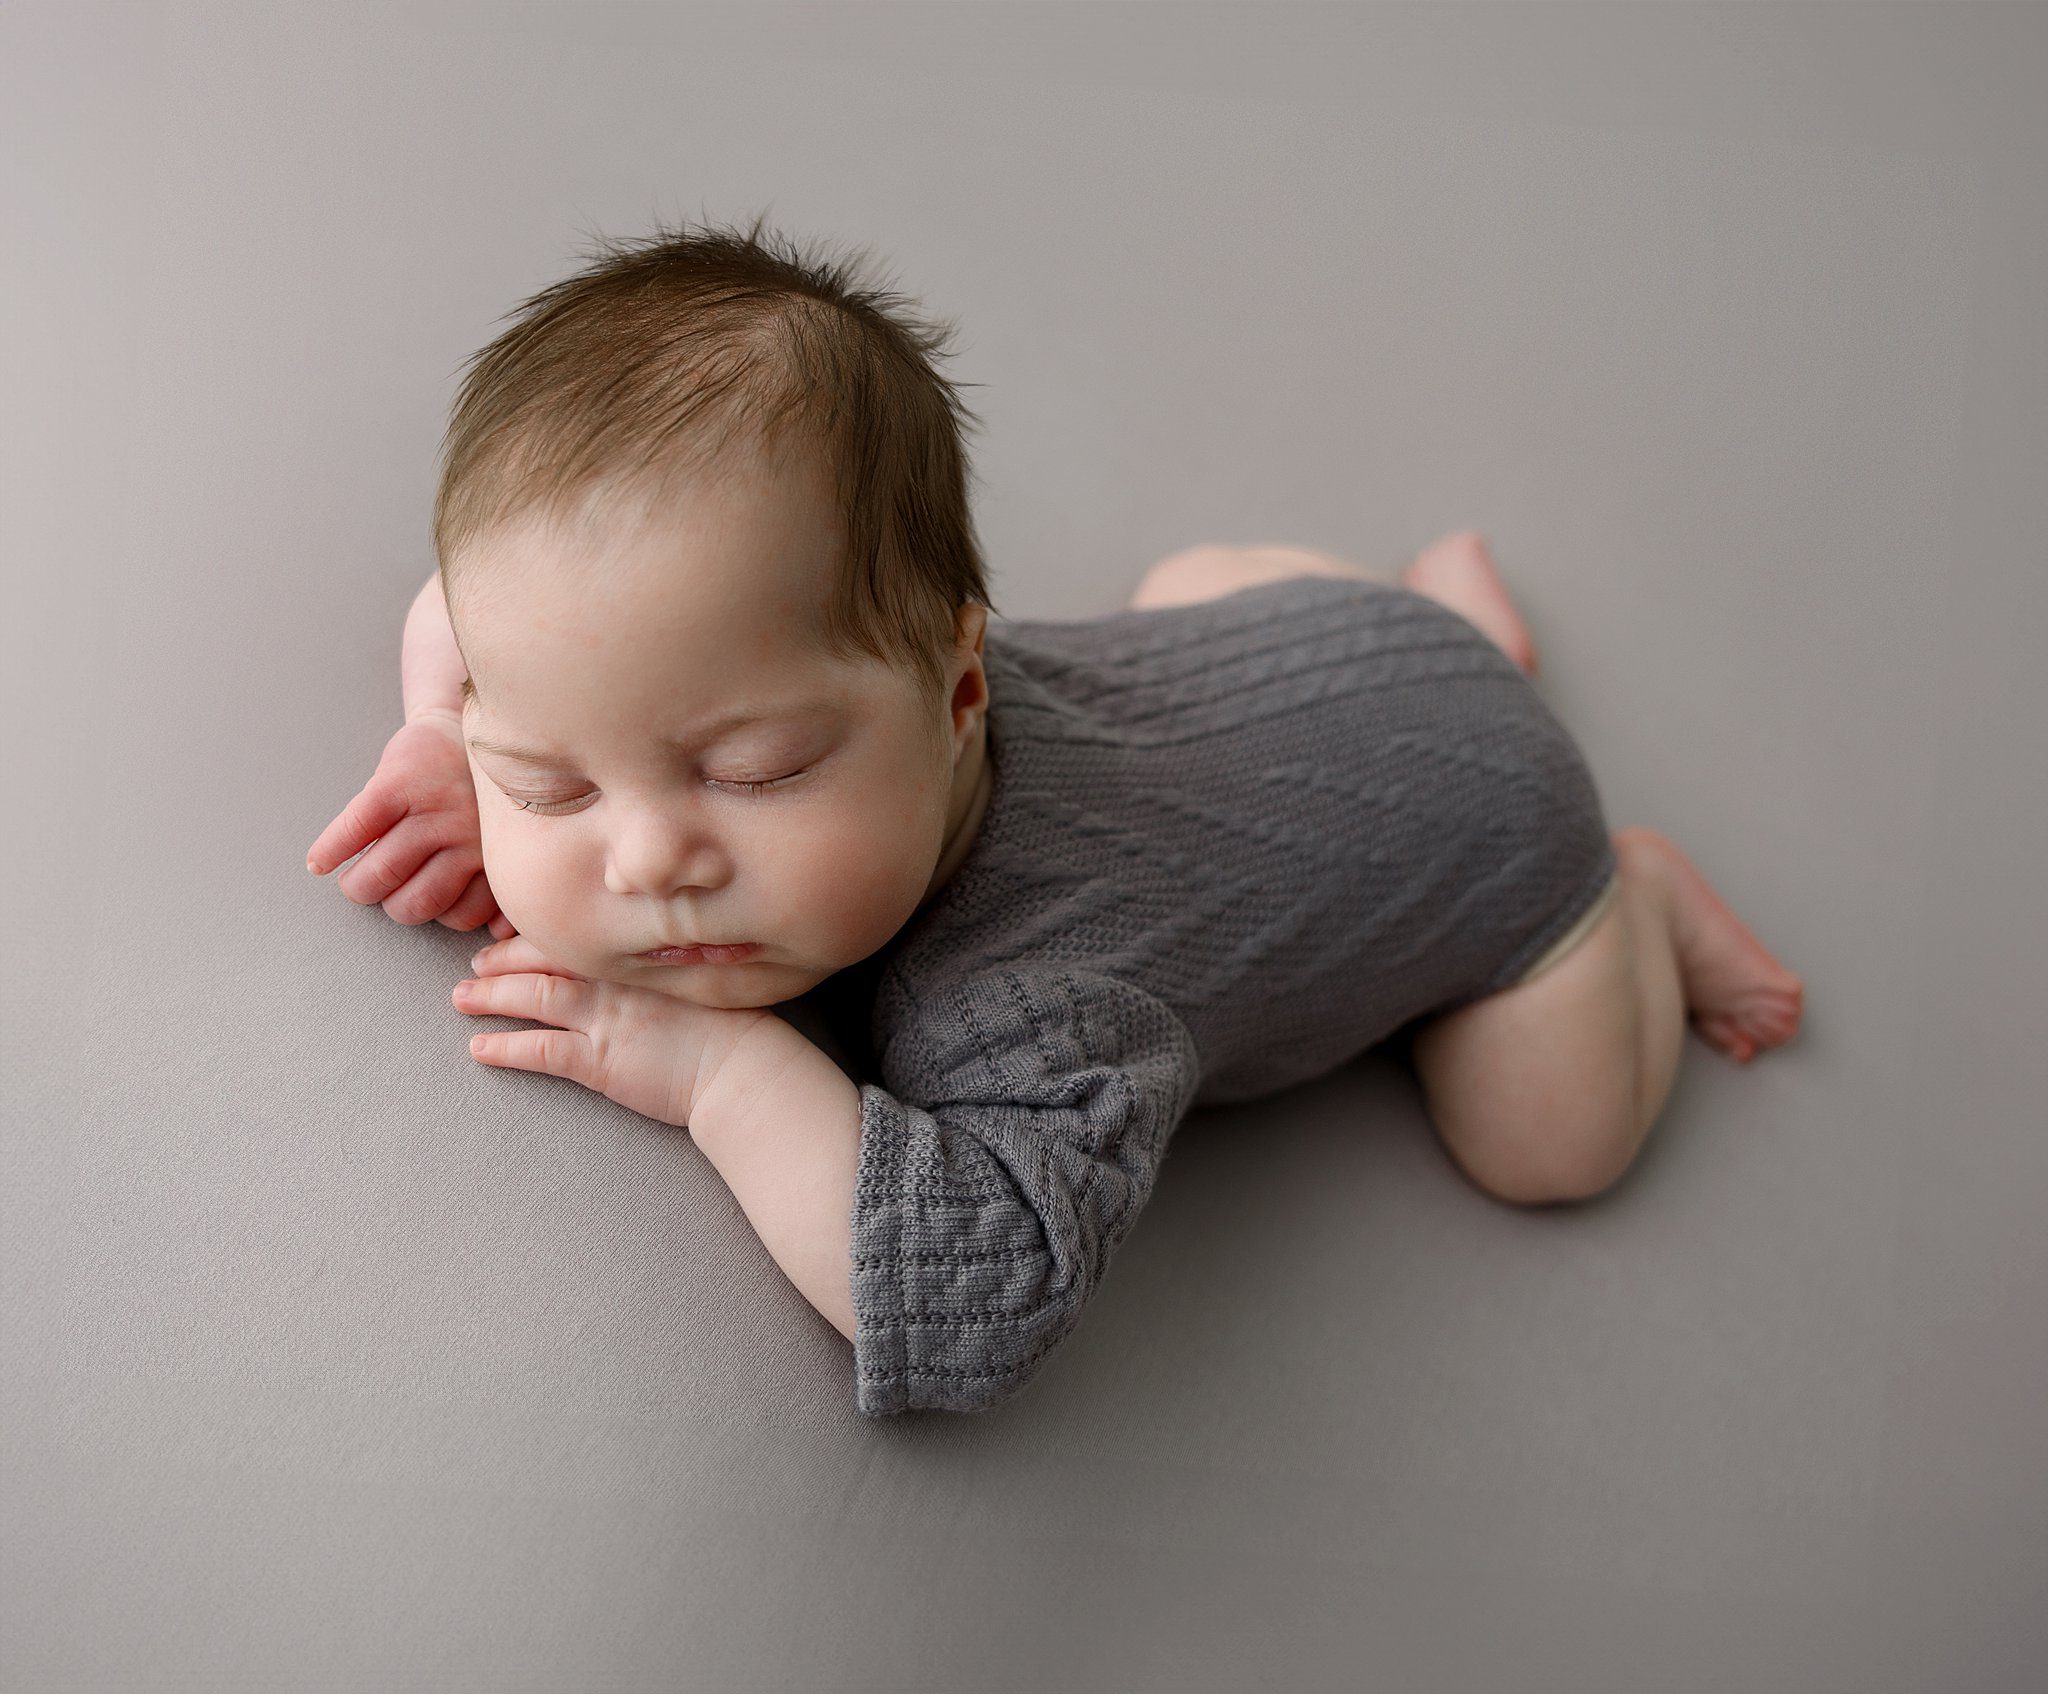 A newborn baby sleeps in a knit onesie on its tummy in a studio after mom had some upmc pelvic floor therapy